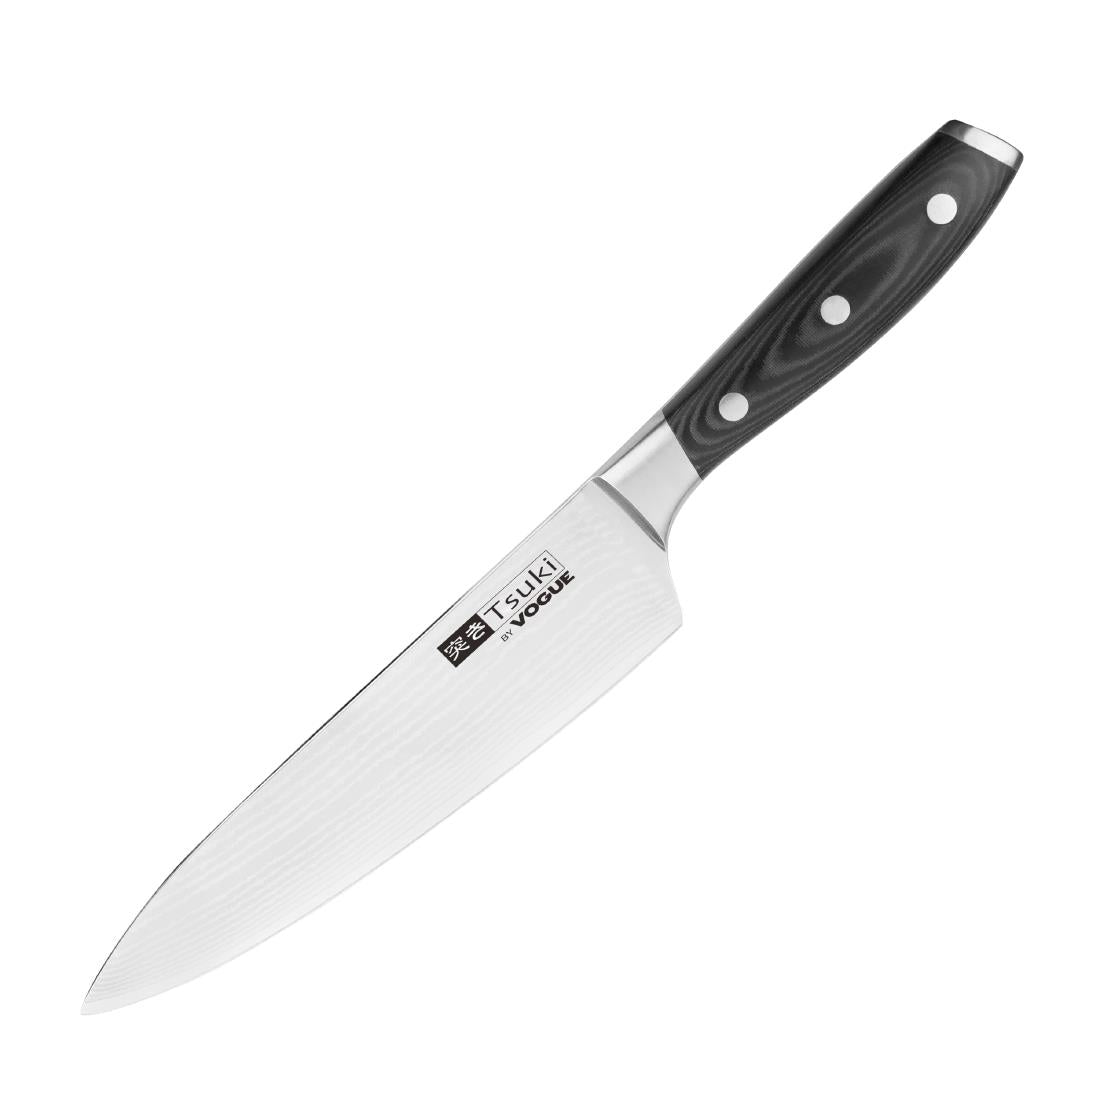 SPECIAL OFFER Tsuki 4 Piece Series 7 Knife Set and Case